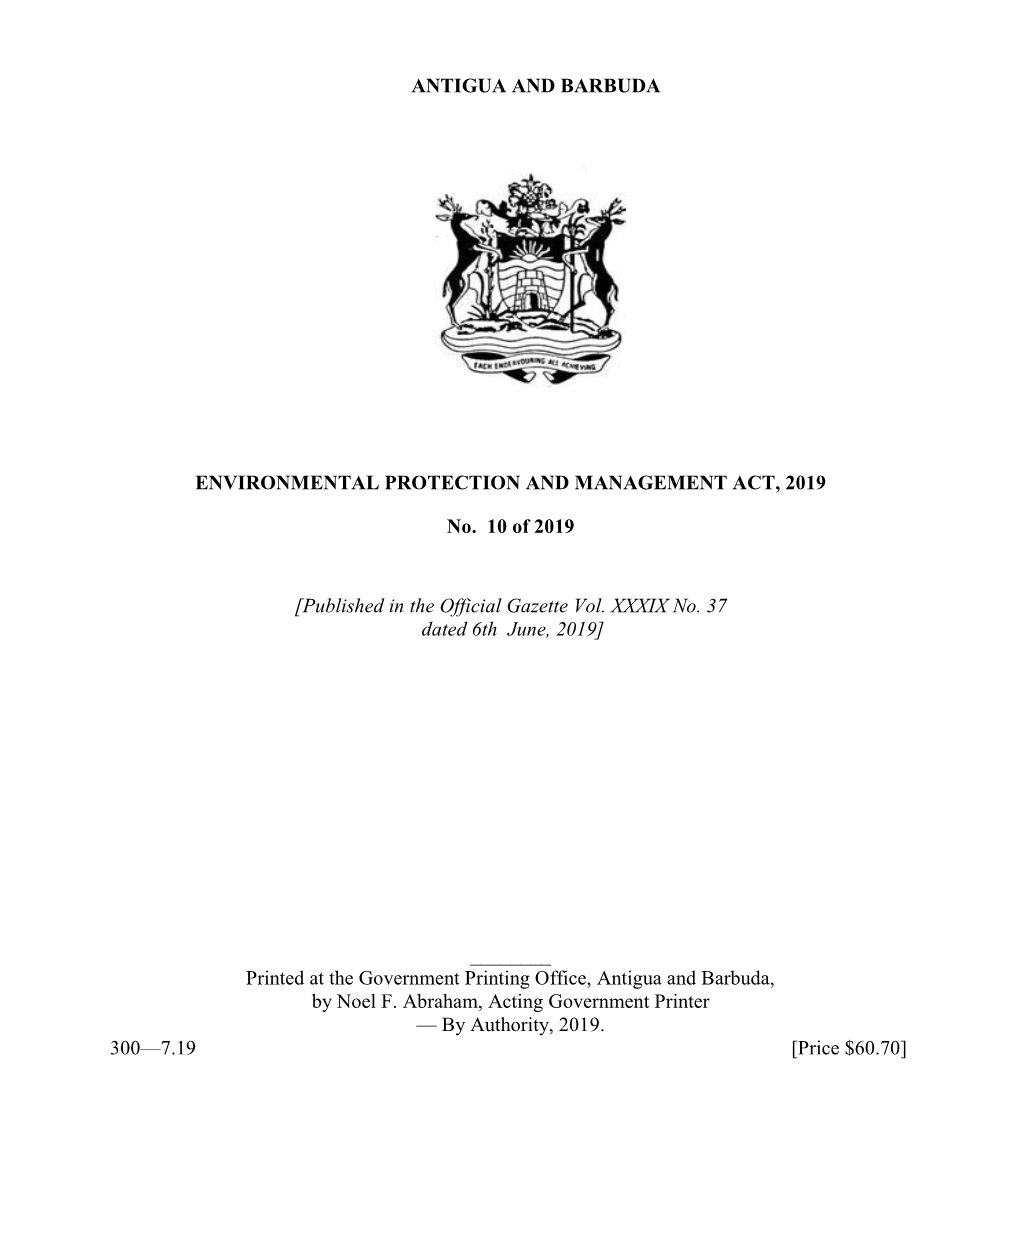 Environmental Protection and Management Act, 2019